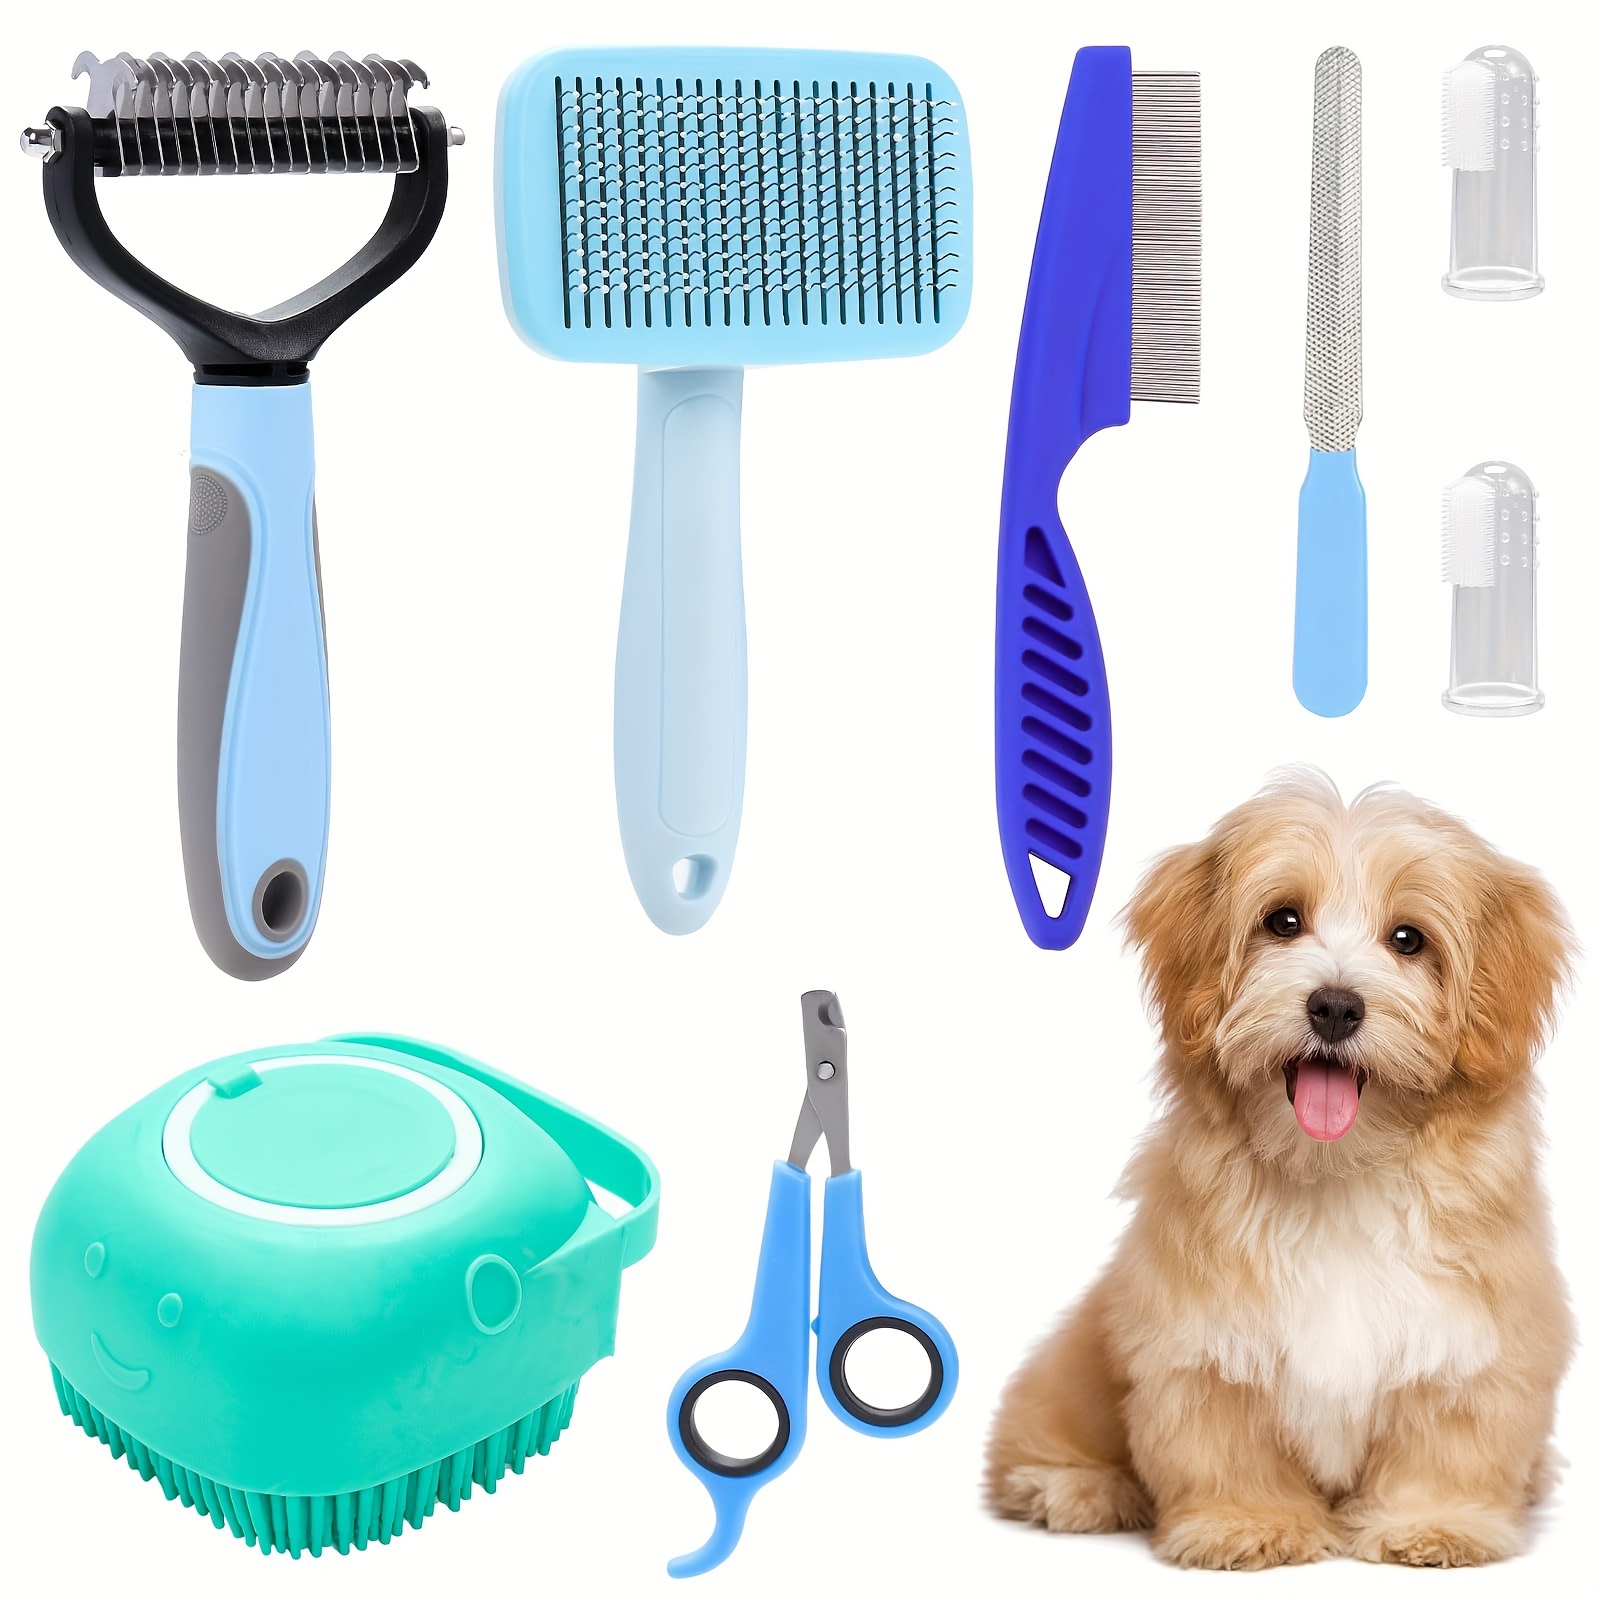 

8pcs Dog Brush Grooming Set, Pet Self Cleaning Set With Pet Nail Clipper And File, Flea Comb, Pet Shampoo Bath Brush, Pet Hair Removal Brush, Pet Hair Remover Comb, Silicone Toothbrush